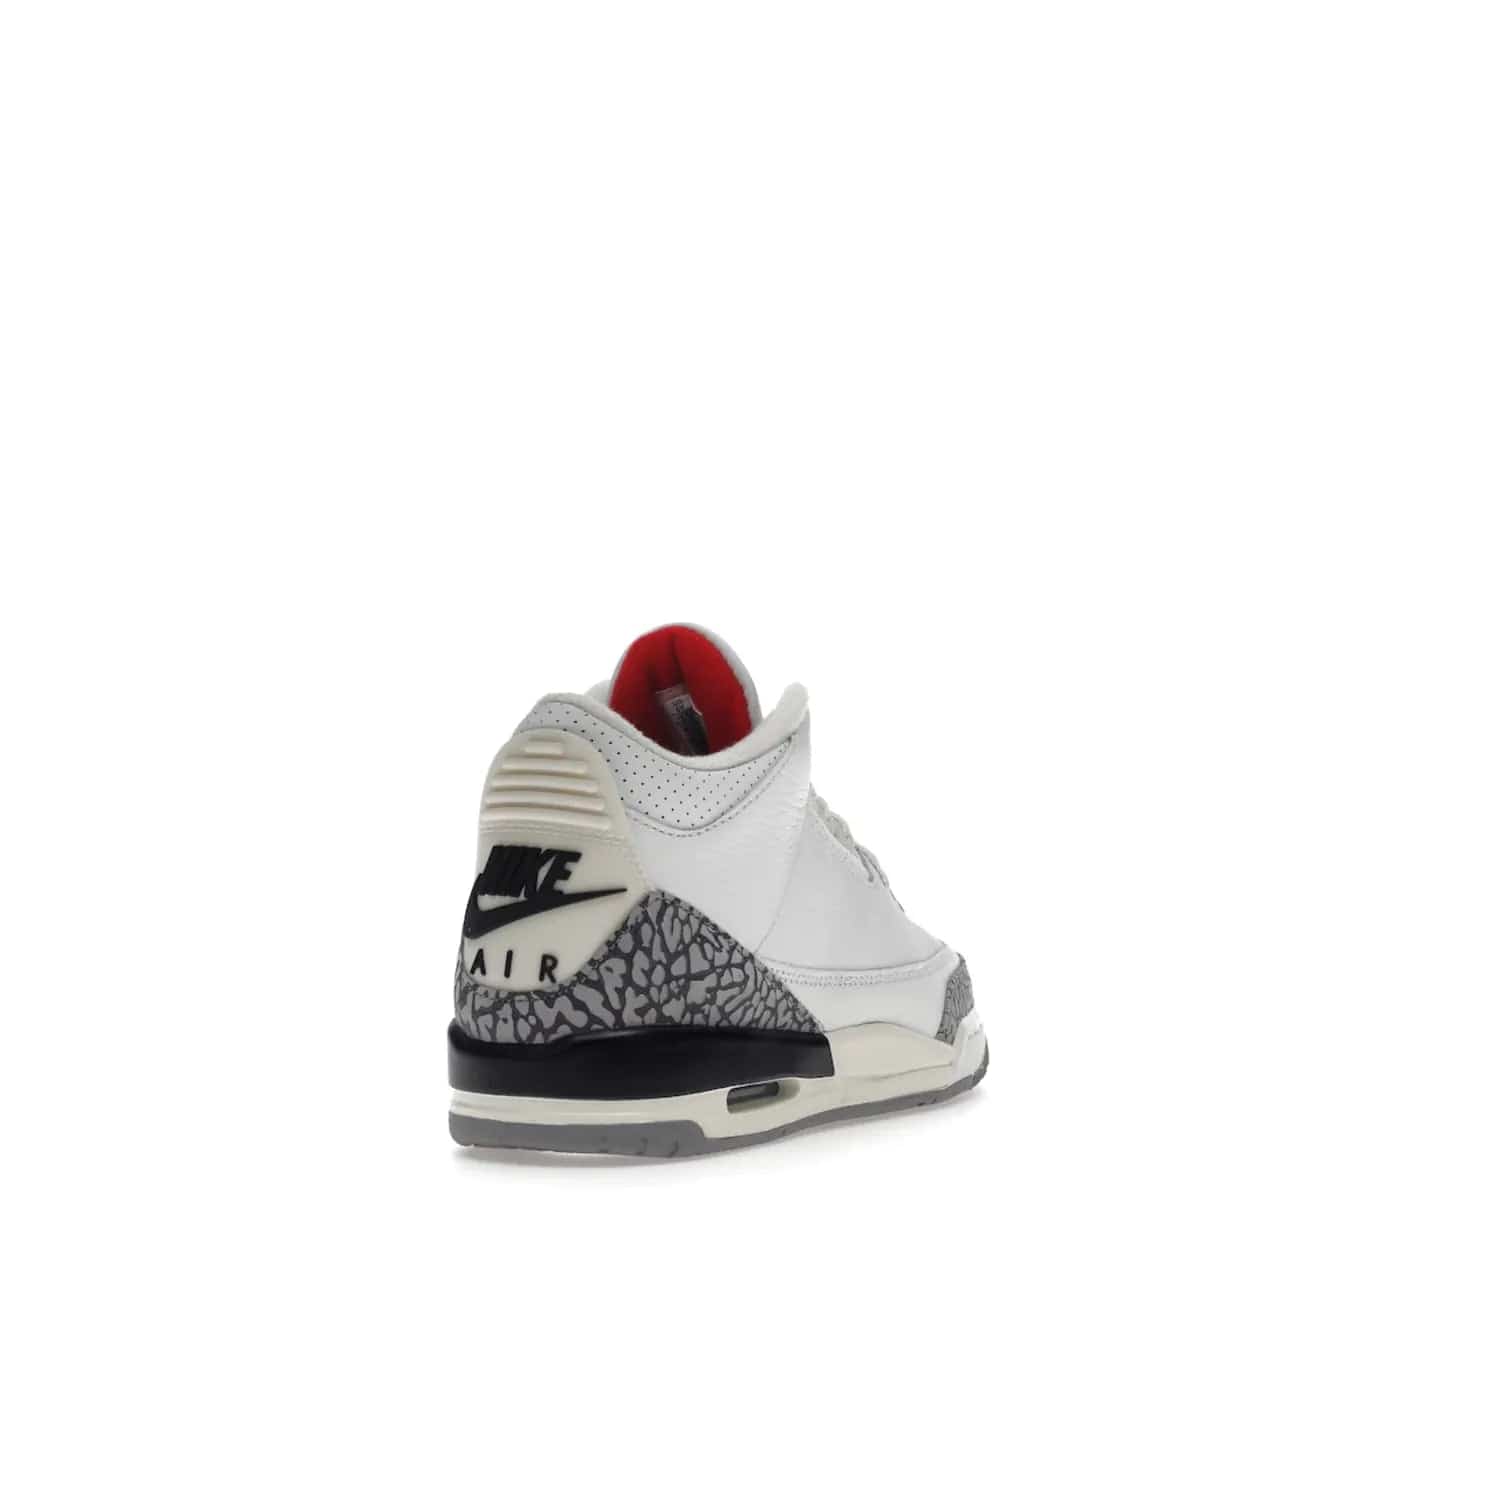 Jordan 3 Retro White Cement Reimagined (GS) - Image 31 - Only at www.BallersClubKickz.com - Grab the perfect blend of modern design and classic style with the Jordan 3 Retro White Cement Reimagined (GS). Features Summit White, Fire Red, Black, and Cement Grey colorway, iconic Jordan logo embroidered on the tongue, and “Nike Air” branding. Limited availability, get your pair before March 11th 2023.